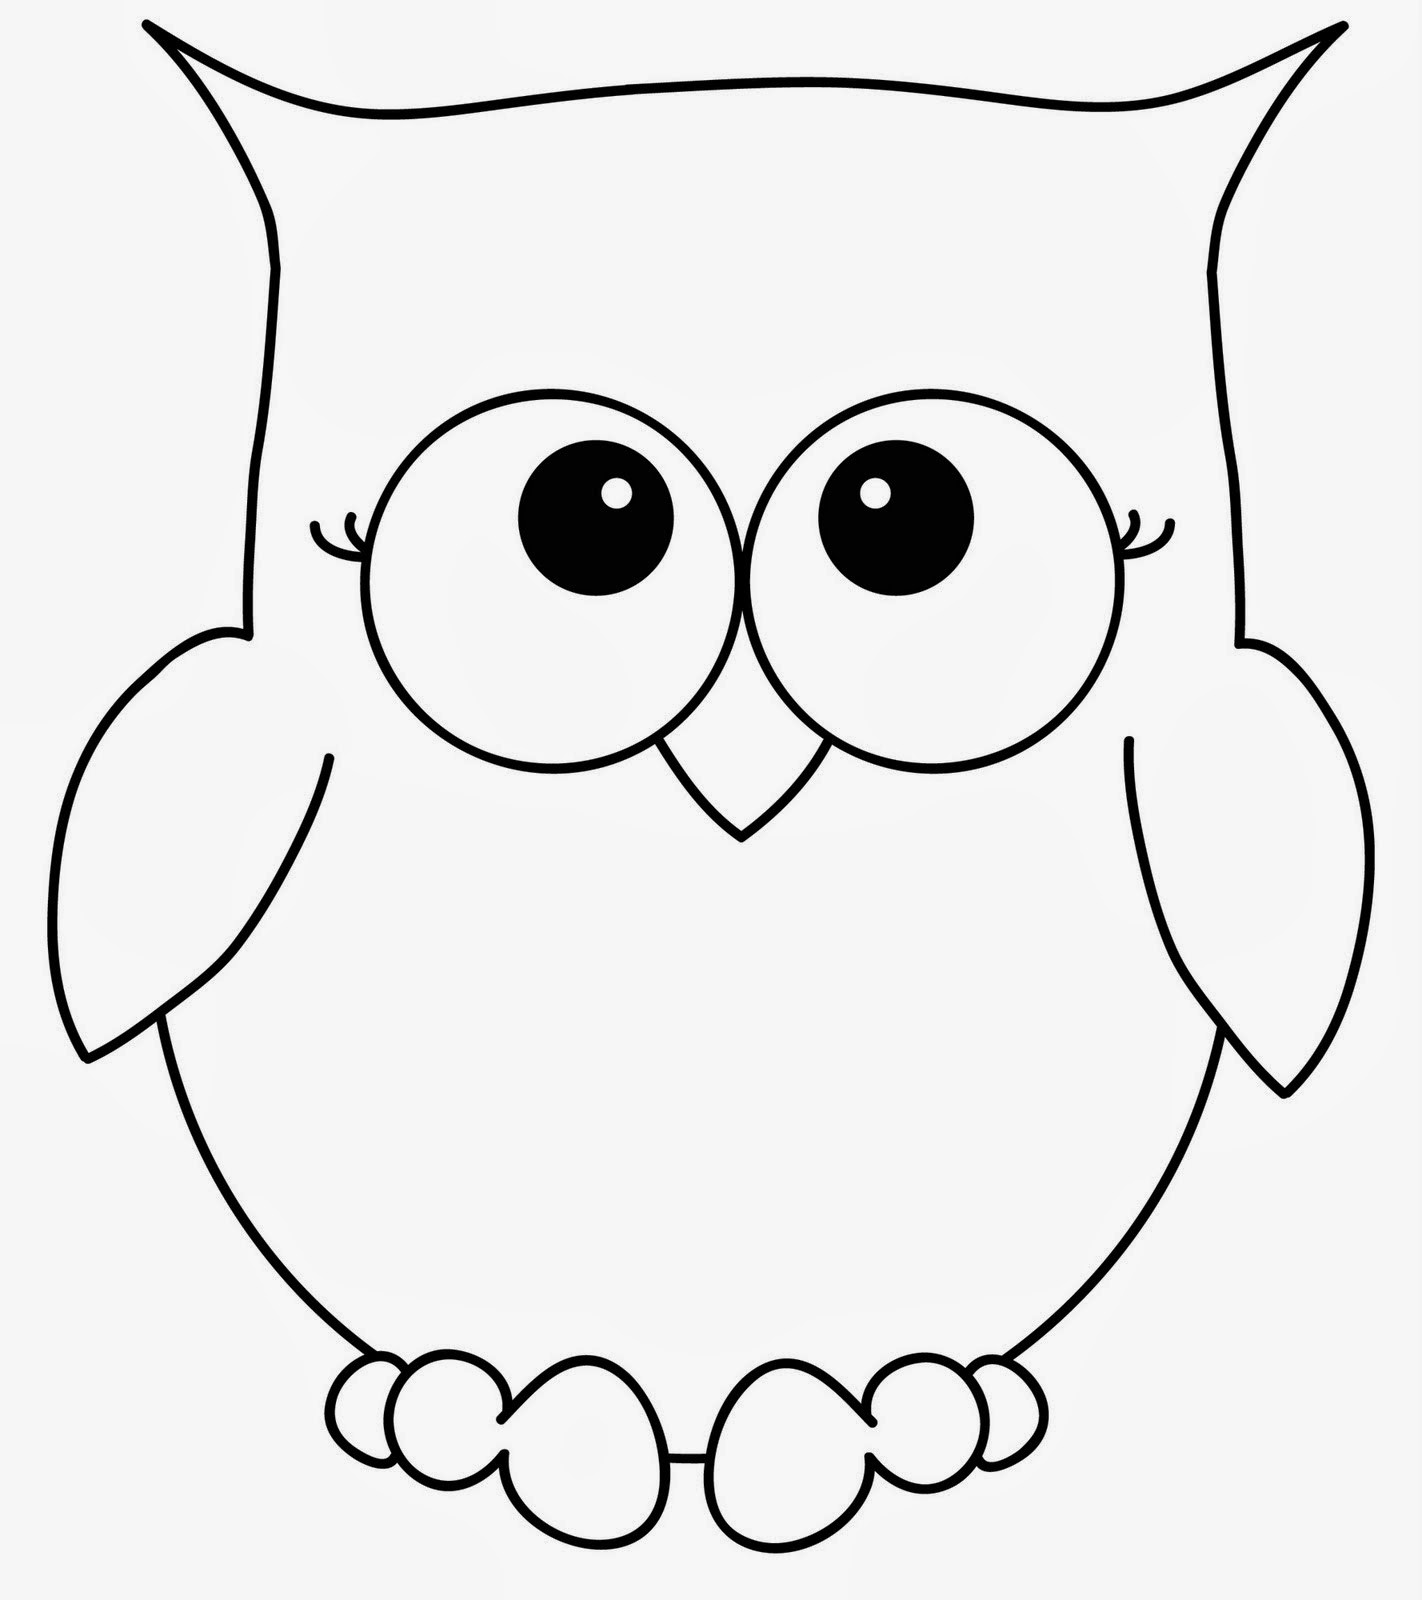 Owl Coloring Pages Printable
 Selimut ku Cute Lil Owl